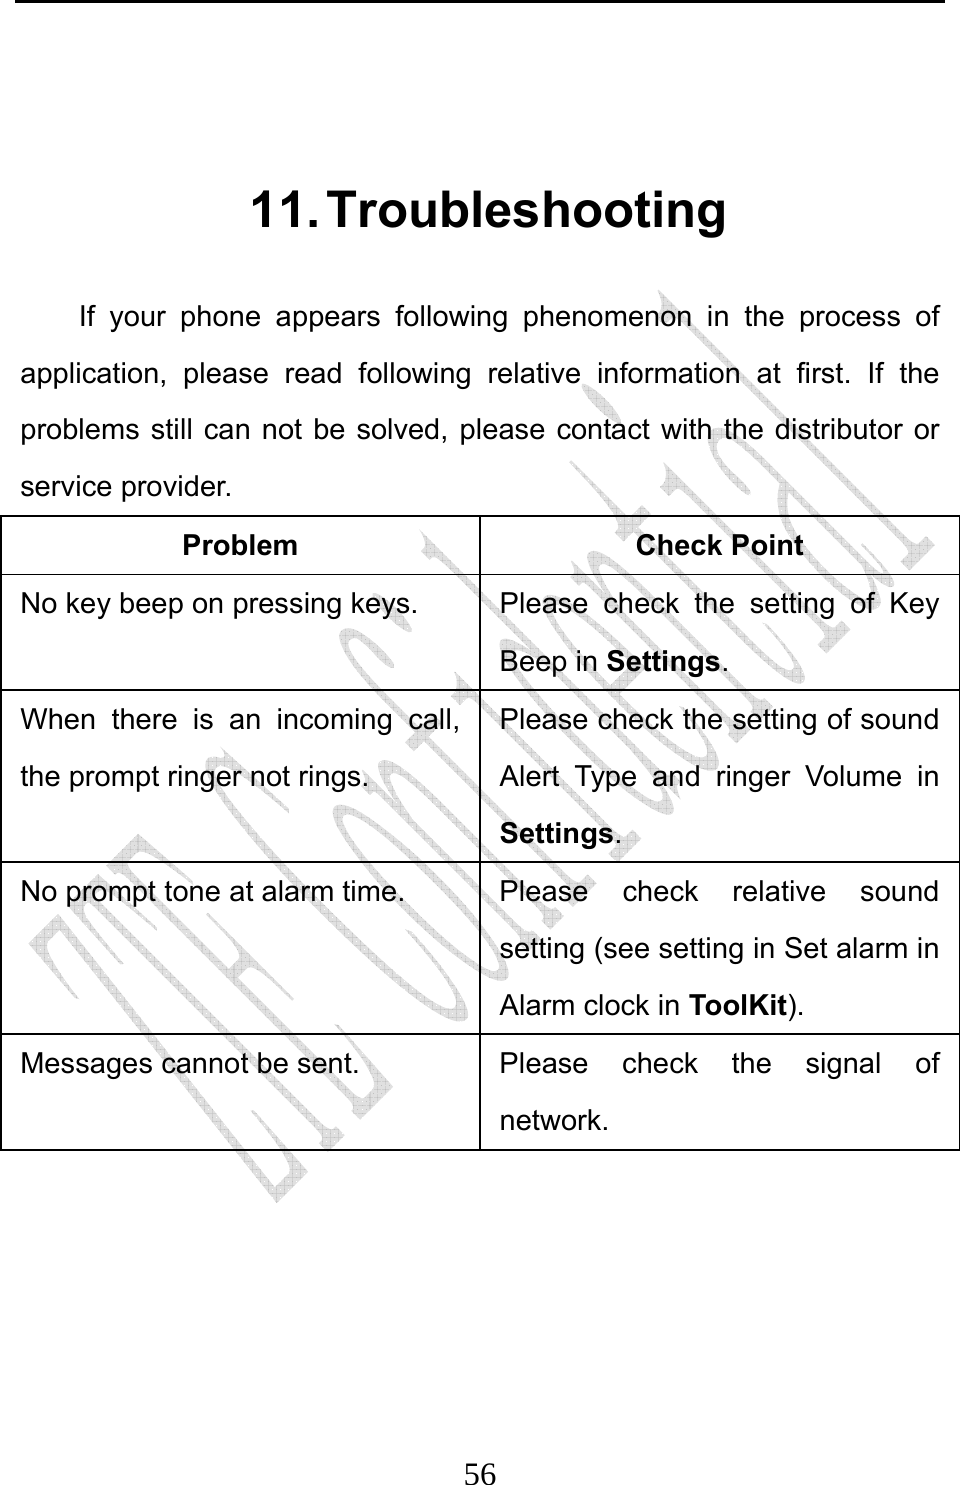                              56 11. Troubleshooting If your phone appears following phenomenon in the process of application, please read following relative information at first. If the problems still can not be solved, please contact with the distributor or service provider. Problem Check Point No key beep on pressing keys.  Please check the setting of Key Beep in Settings. When there is an incoming call, the prompt ringer not rings. Please check the setting of sound Alert Type and ringer Volume in Settings. No prompt tone at alarm time.  Please  check  relative  sound setting (see setting in Set alarm in Alarm clock in ToolKit). Messages cannot be sent.  Please check the signal of network.   